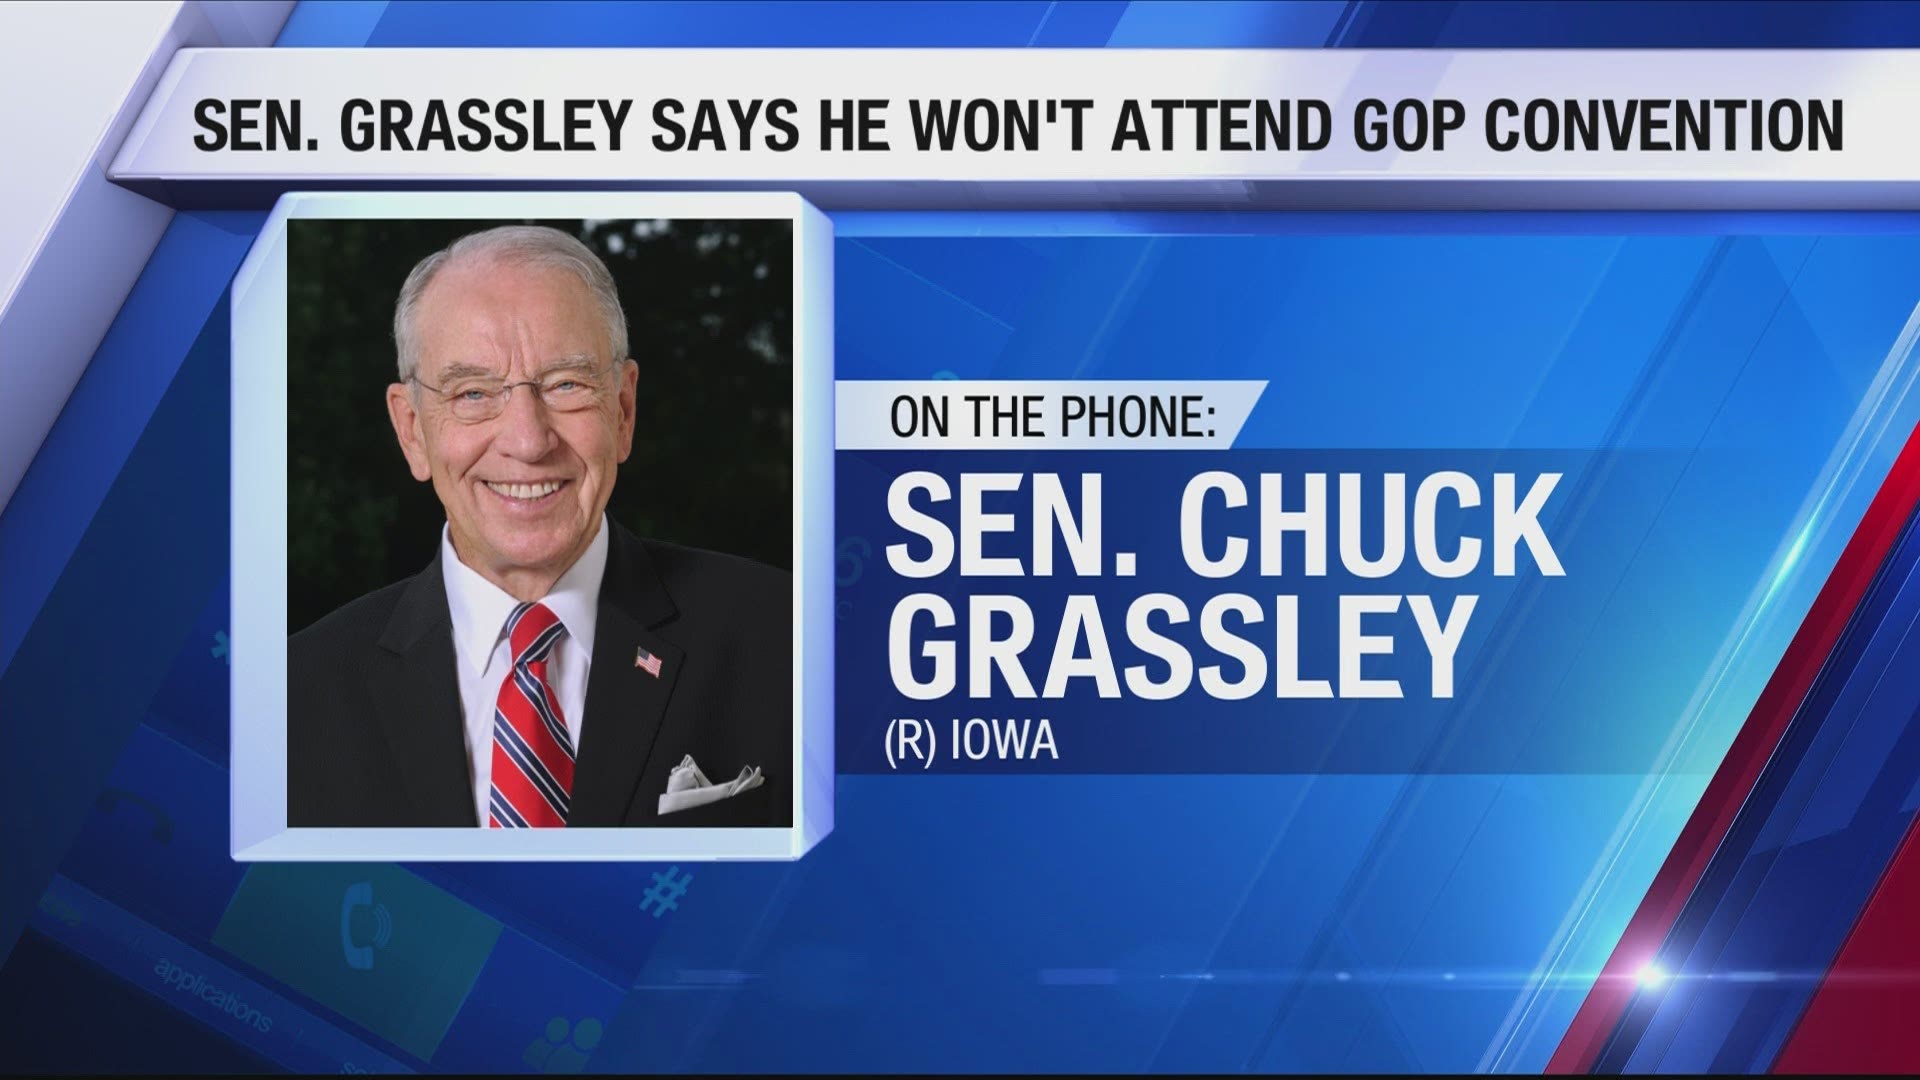 Grassley will skip the GOP convention for the first time in decades